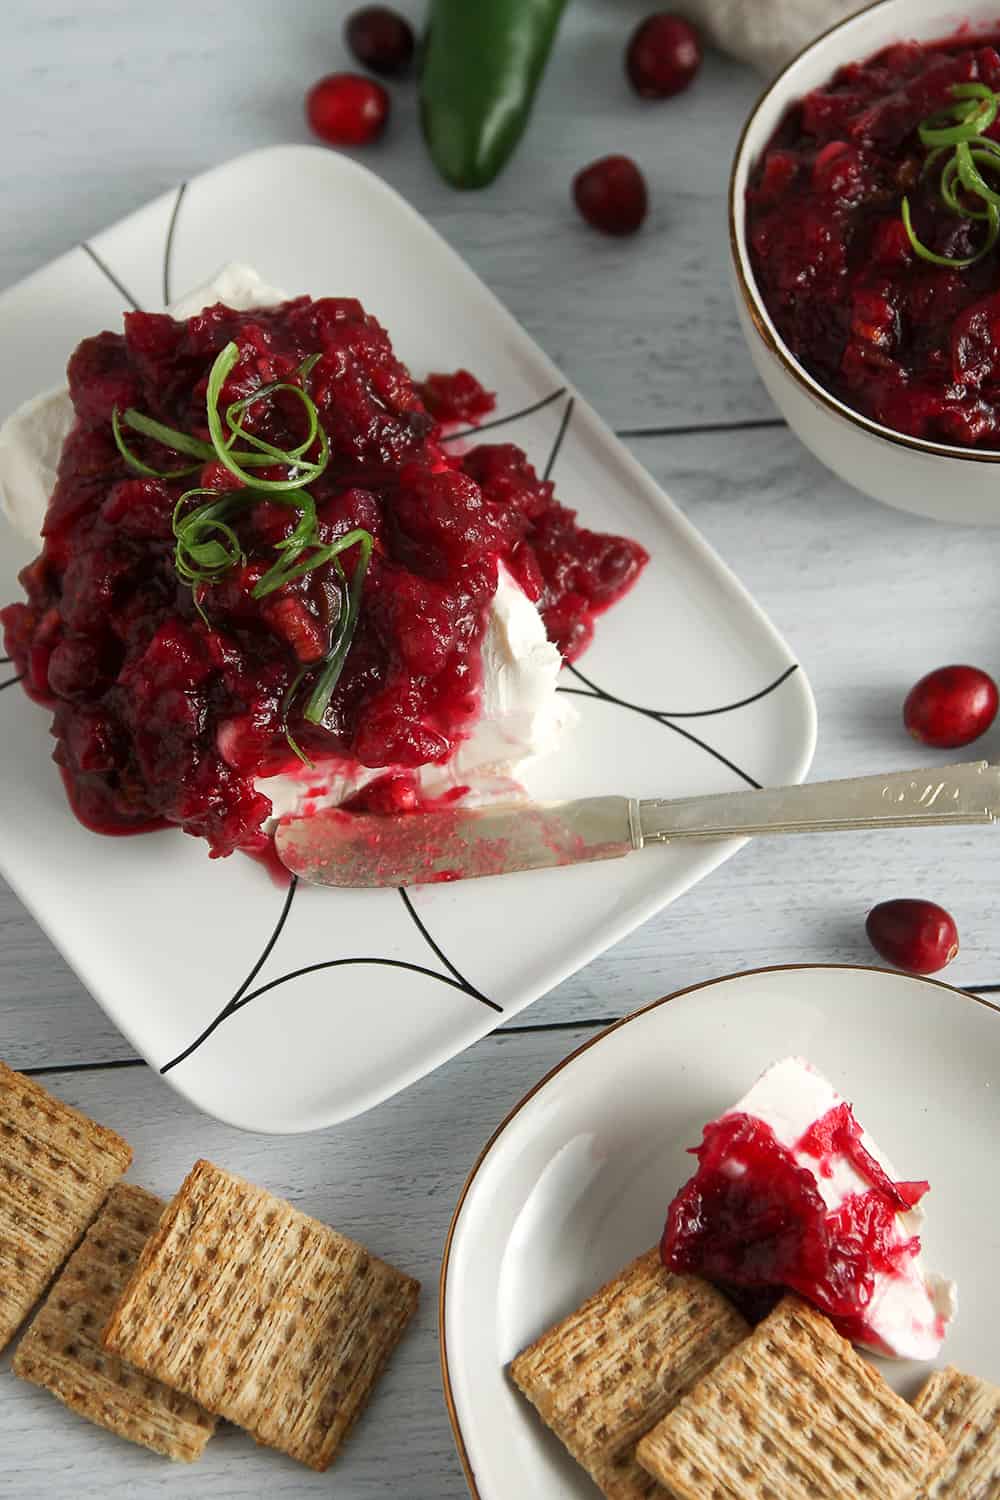 Make Cranberry Cream Cheese Dip as an easy last-minute appetizer with cream cheese and cranberry chutney